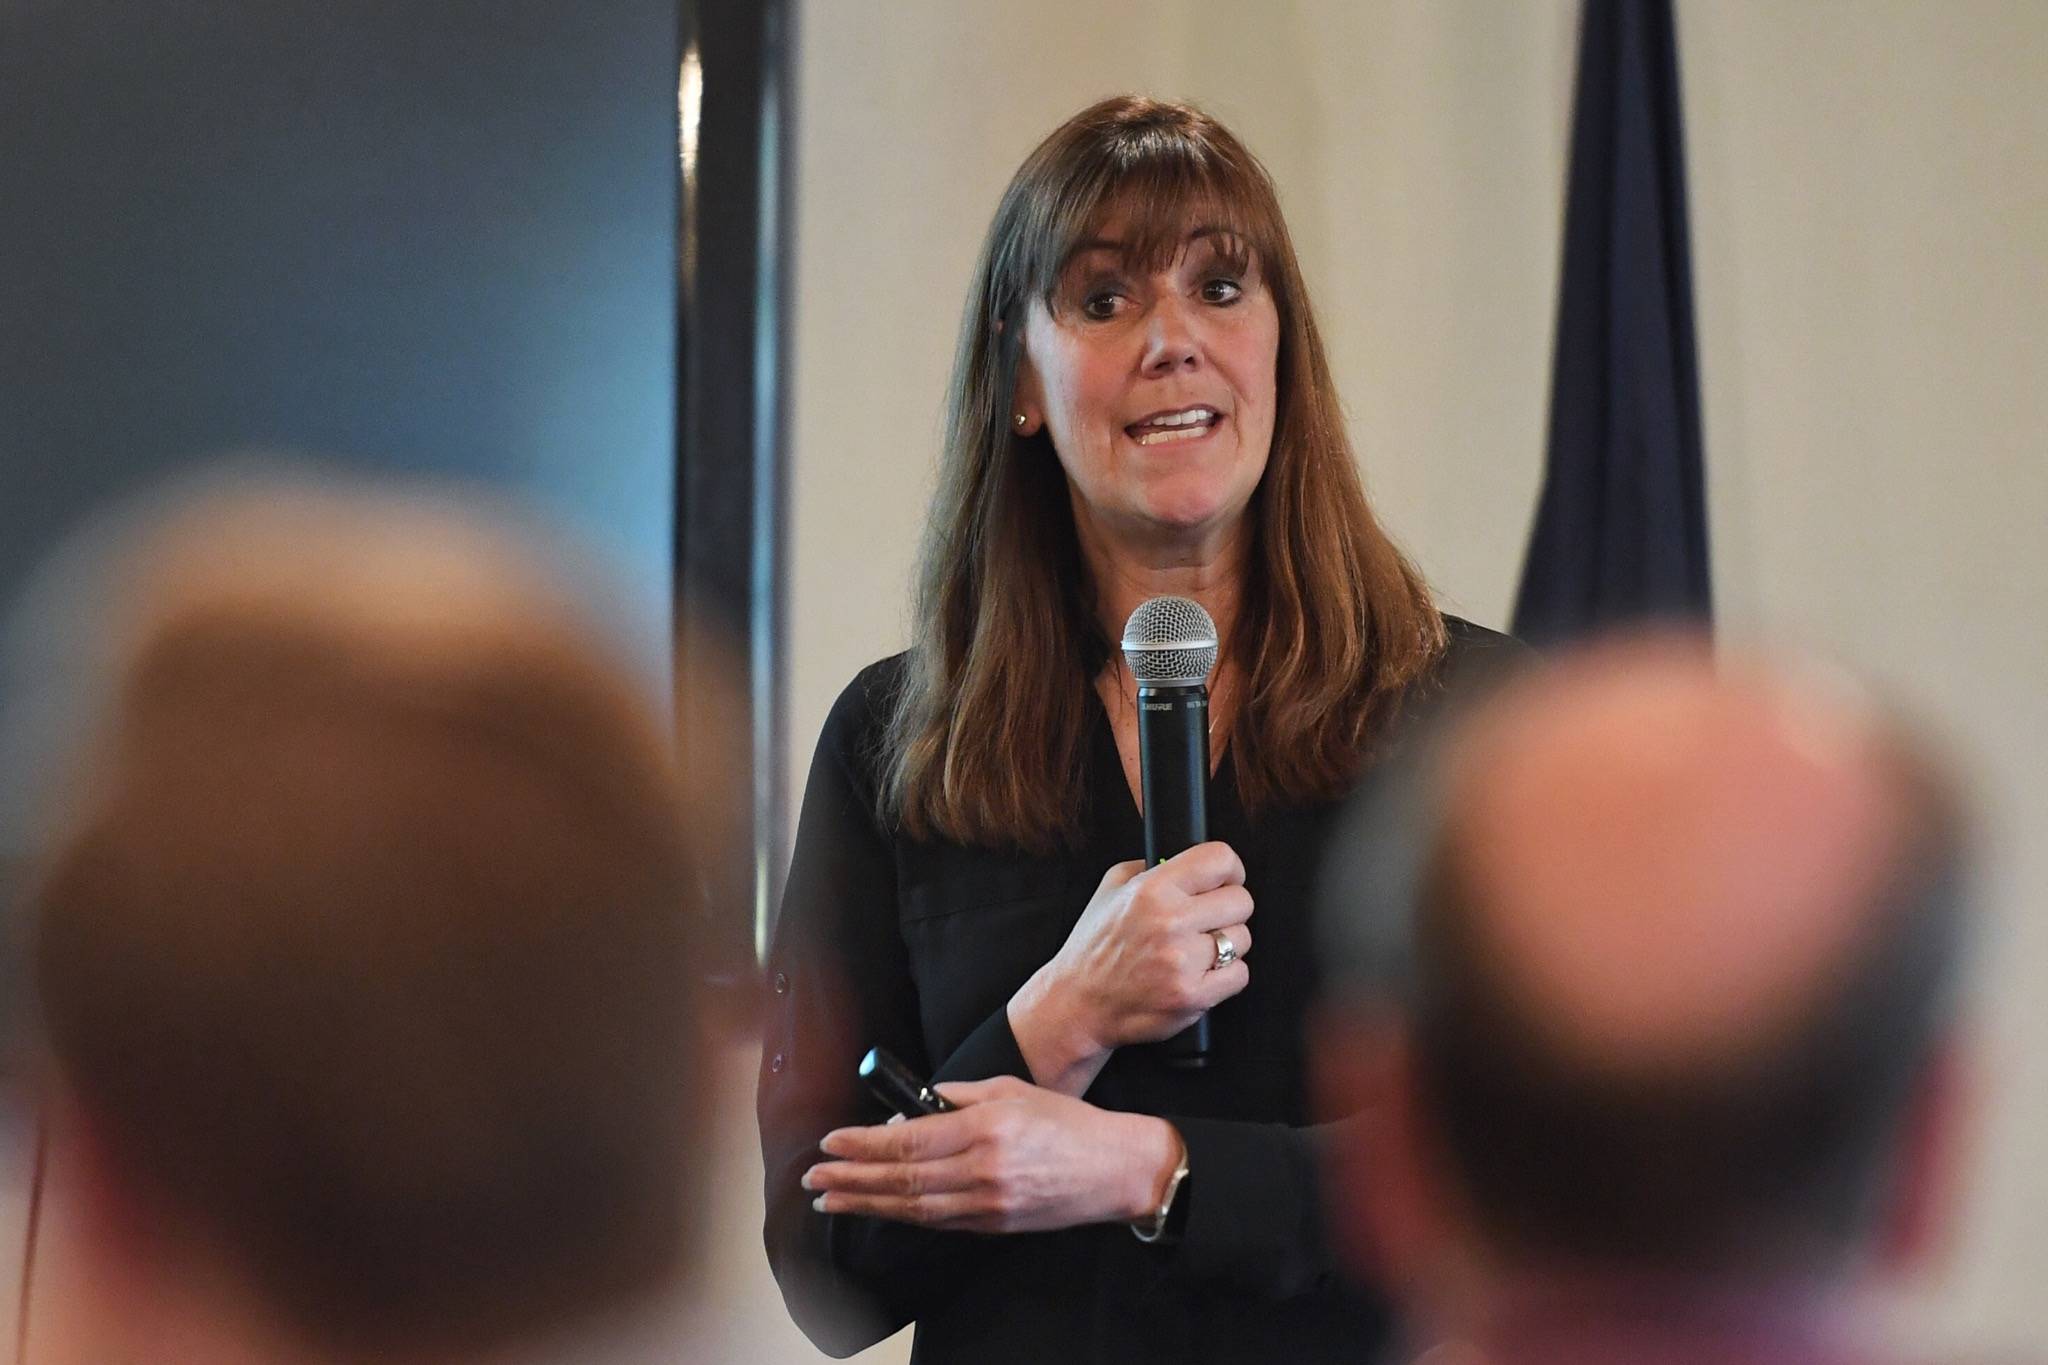 Bridget Weiss, Superintendent for the Juneau School District, speaks to the Juneau Chamber of Commerce during its weekly luncheon at the Moose Lodge on Thursday, May 16, 2019. (Michael Penn | Juneau Empire)